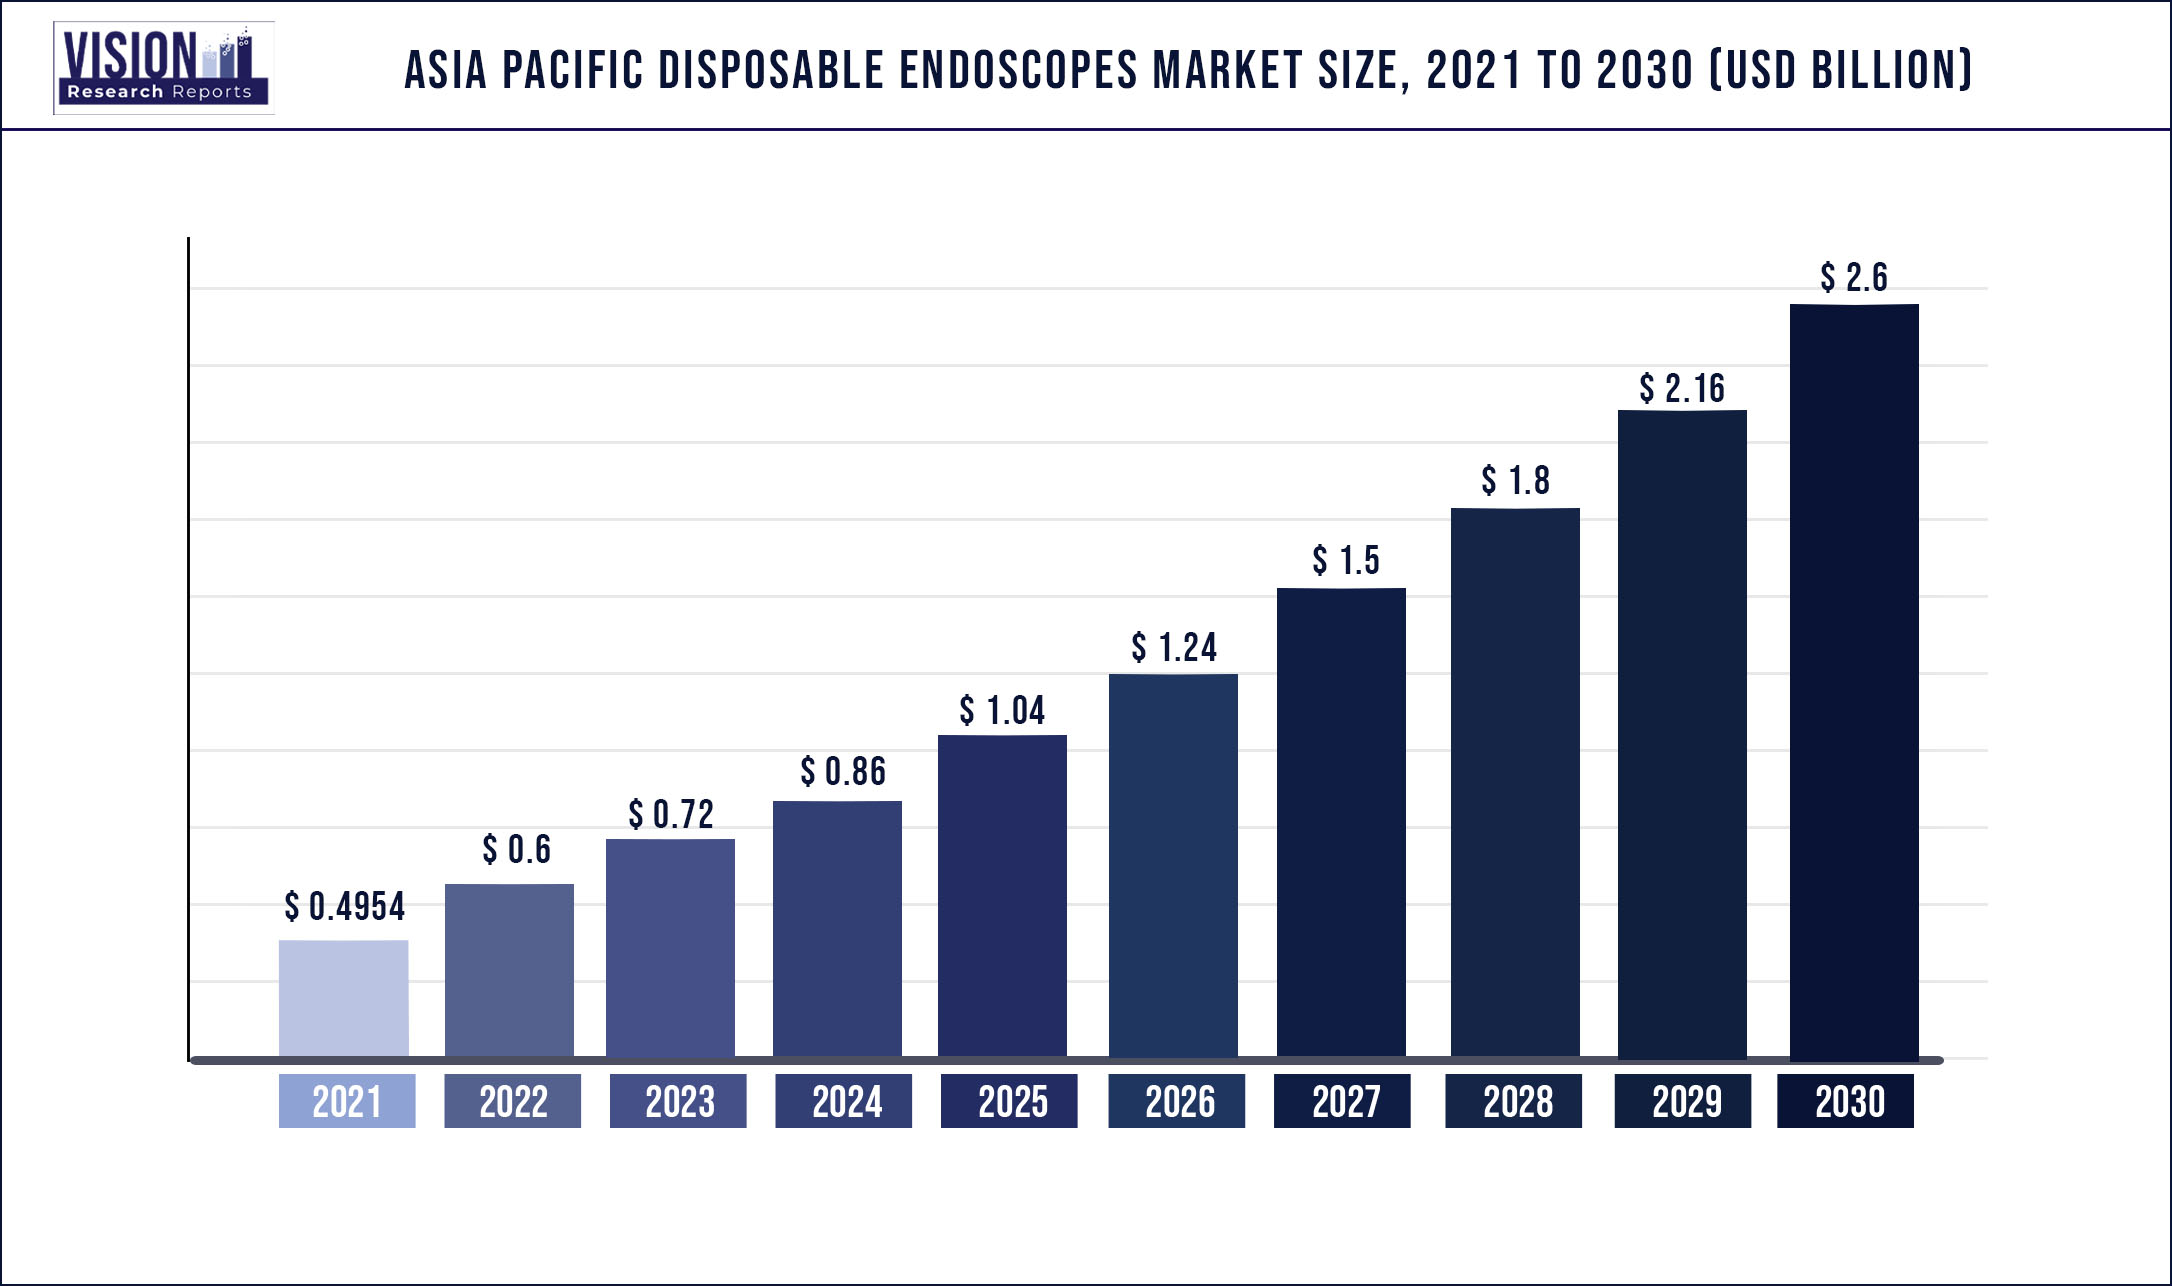 Asia Pacific Disposable Endoscopes Market Size 2021 to 2030